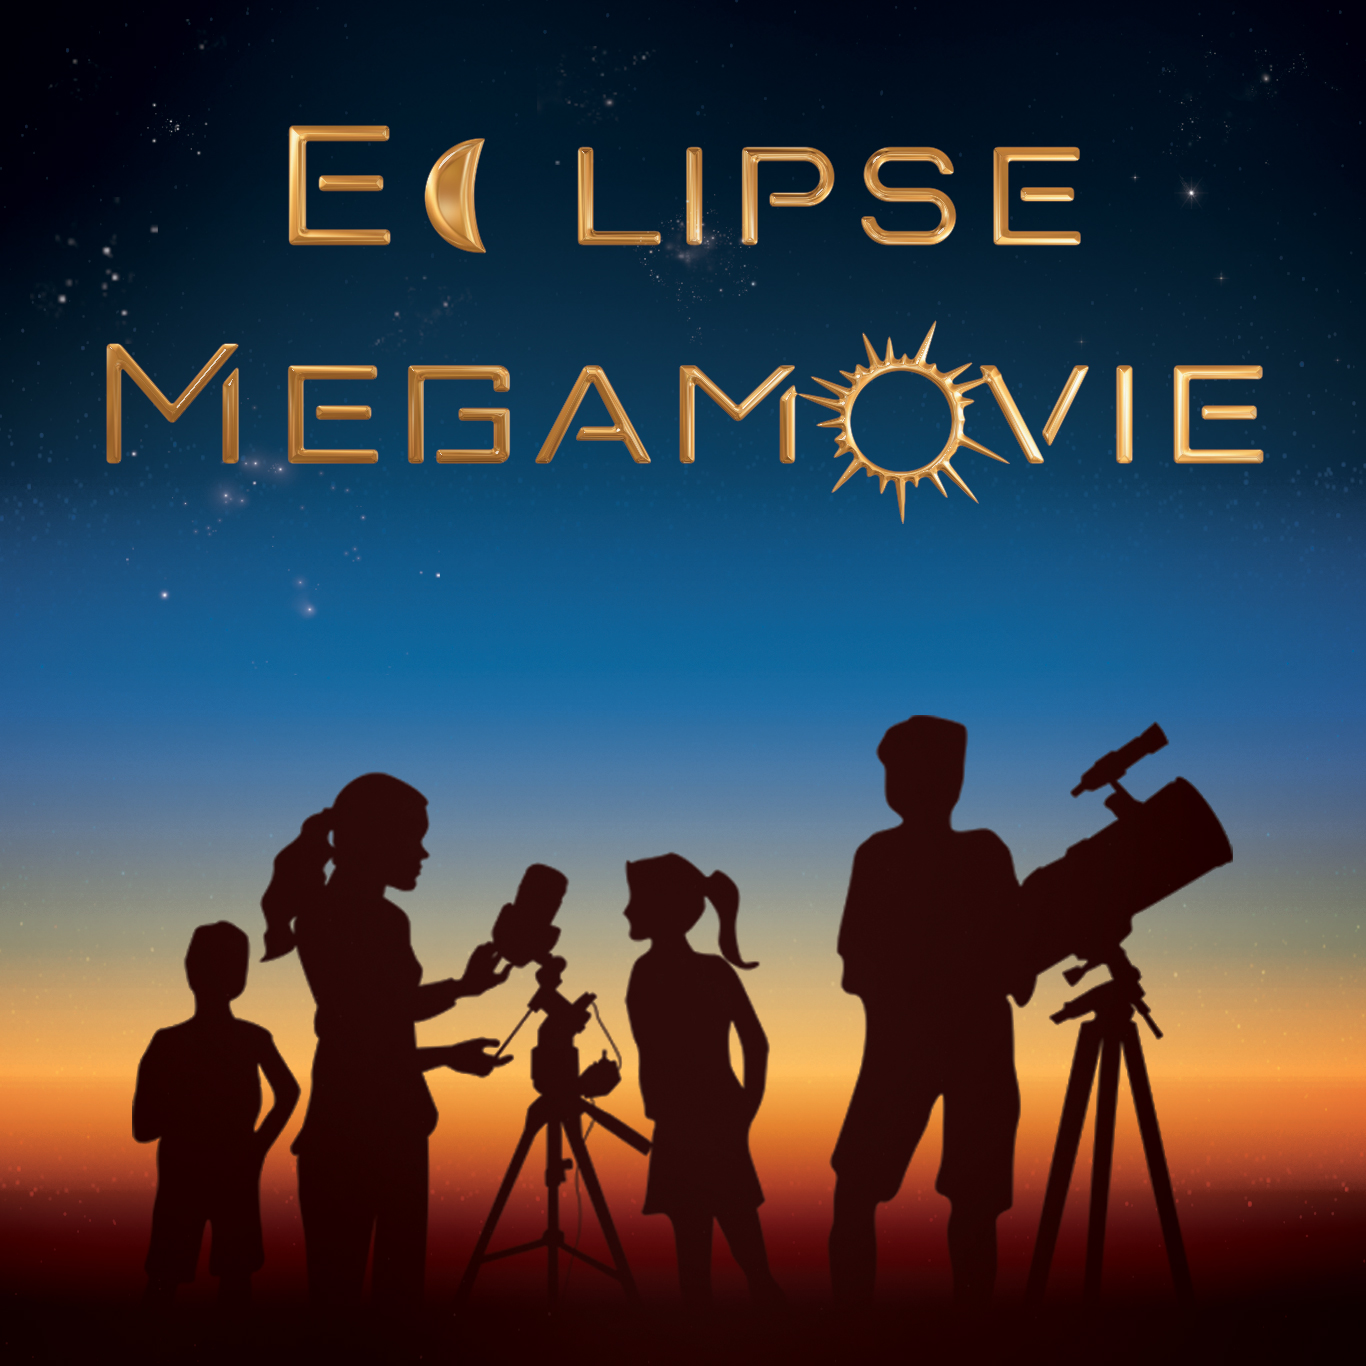 A silhouette image of 3 people with telescopes with the text Eclipse Megamovie above it.